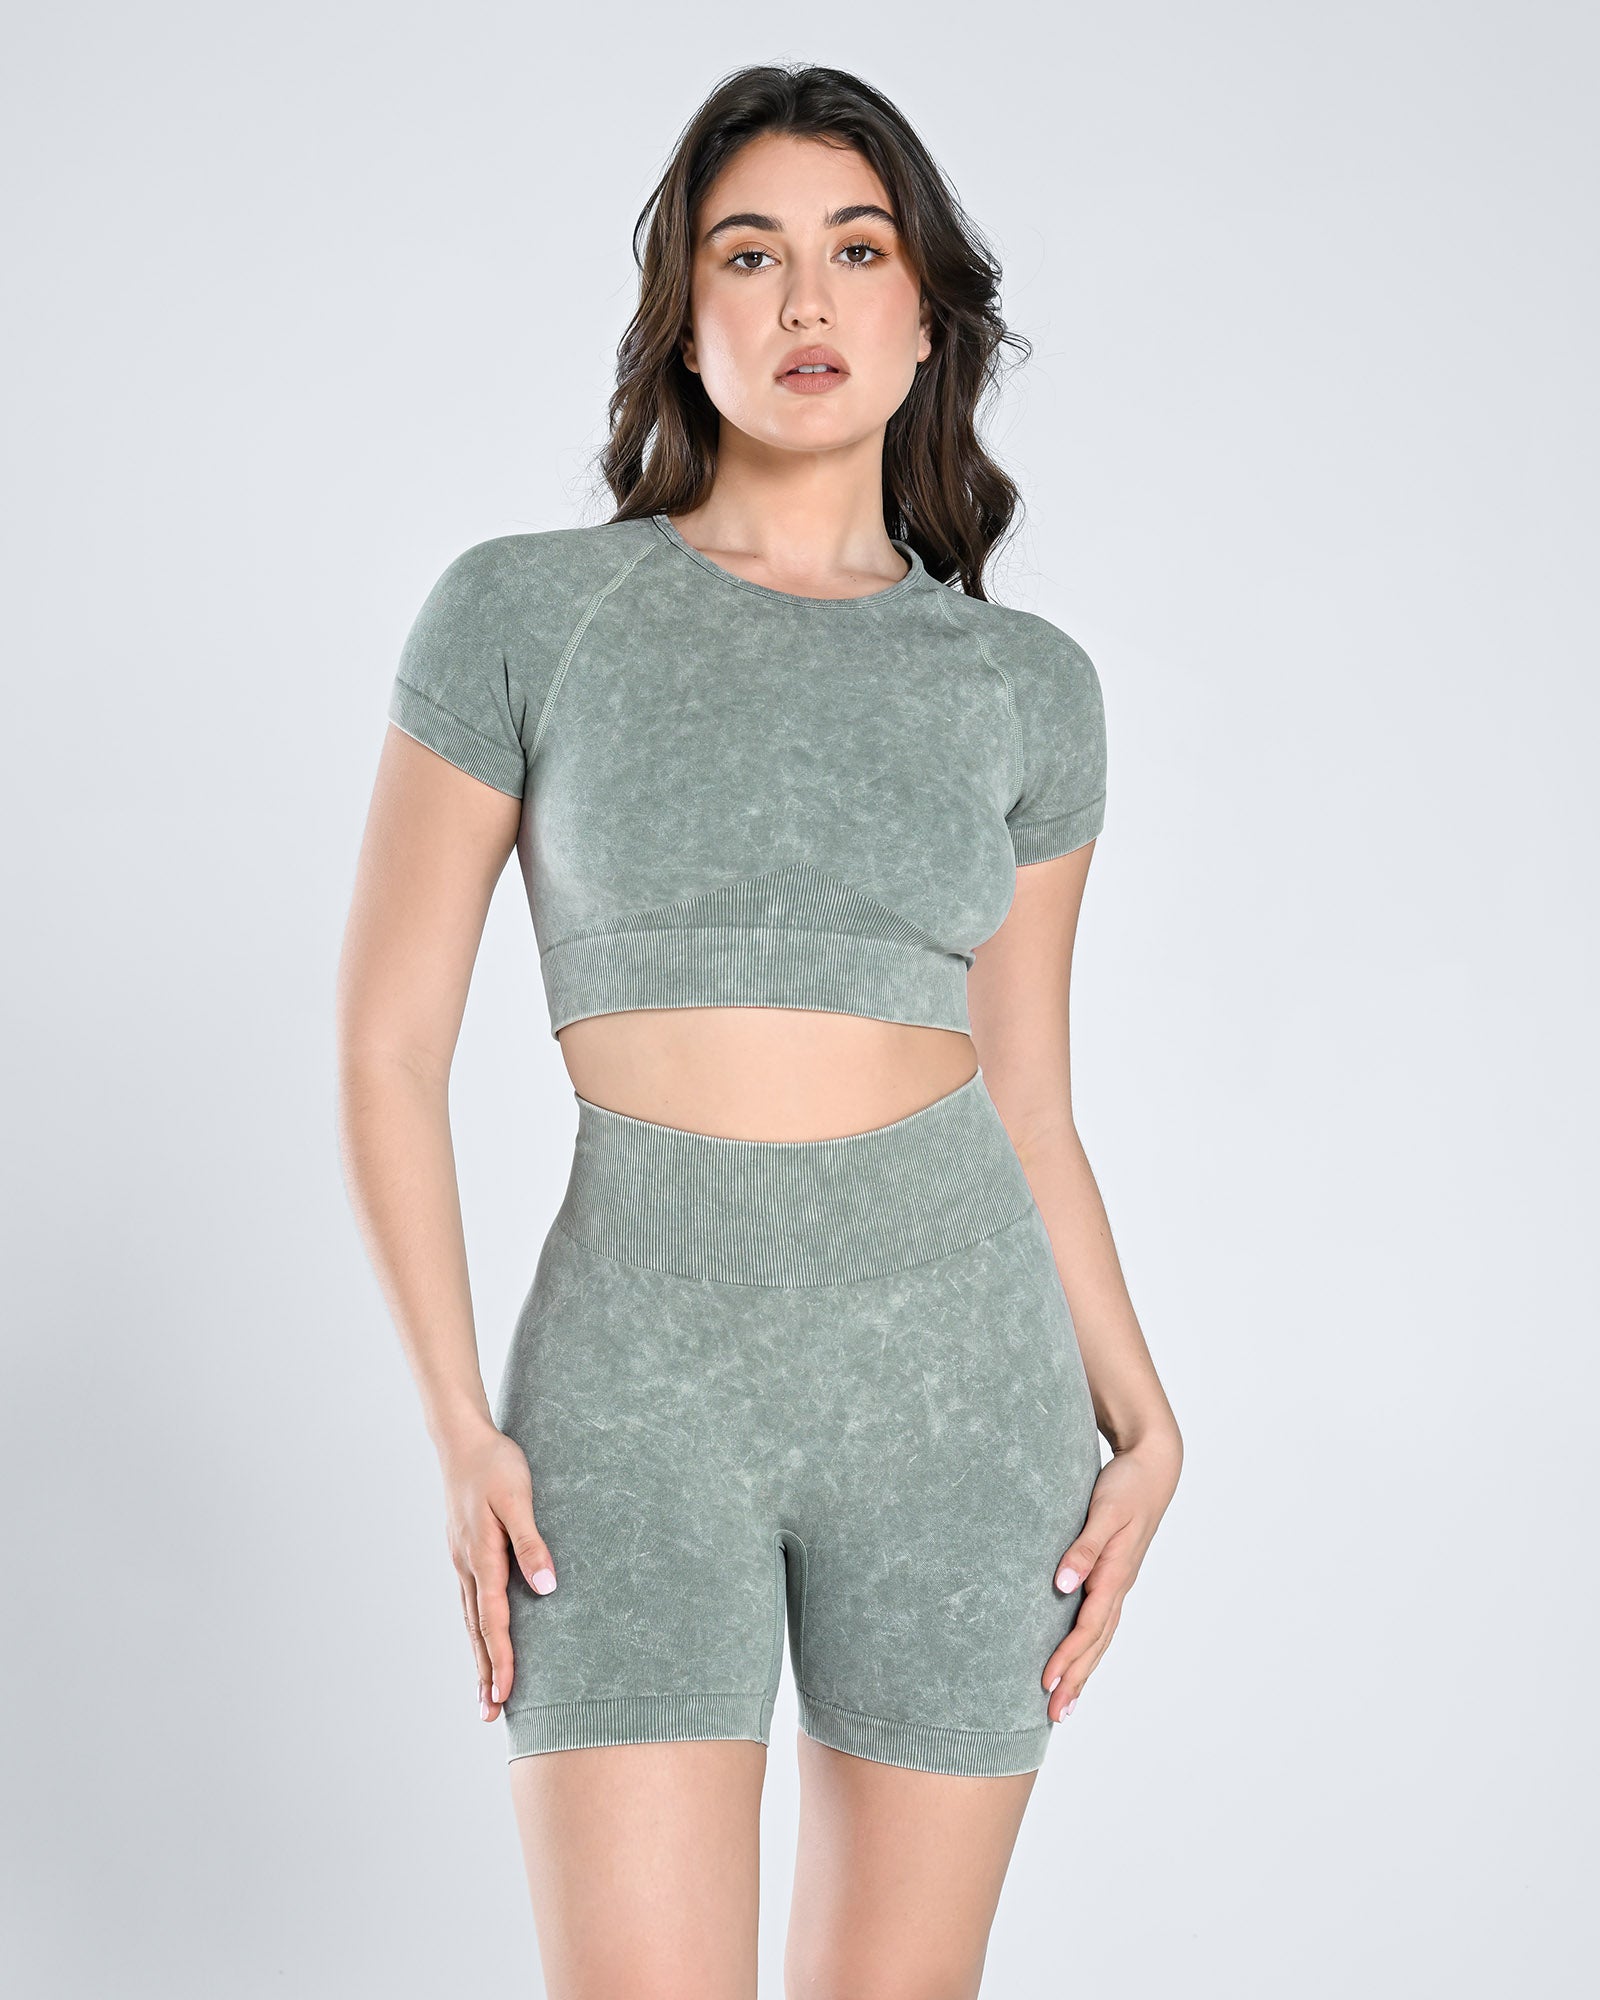 I Found Revolutionary Shapewear Online Ft. Cosmolle – Stuff to